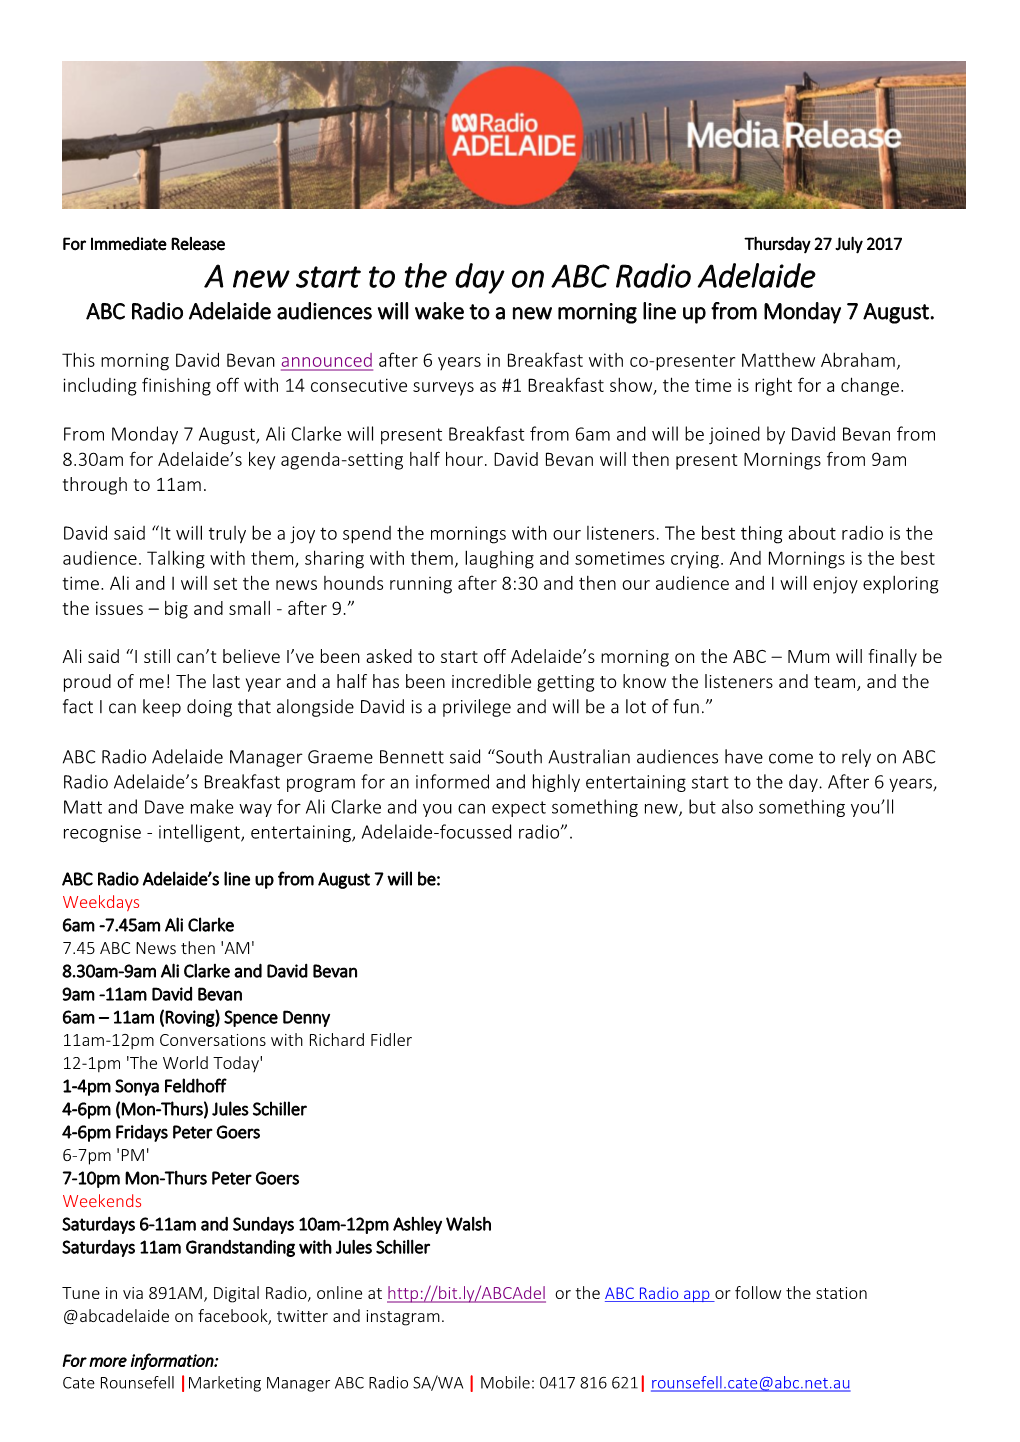 A New Start to the Day on ABC Radio Adelaide ABC Radio Adelaide Audiences Will Wake to a New Morning Line up from Monday 7 August